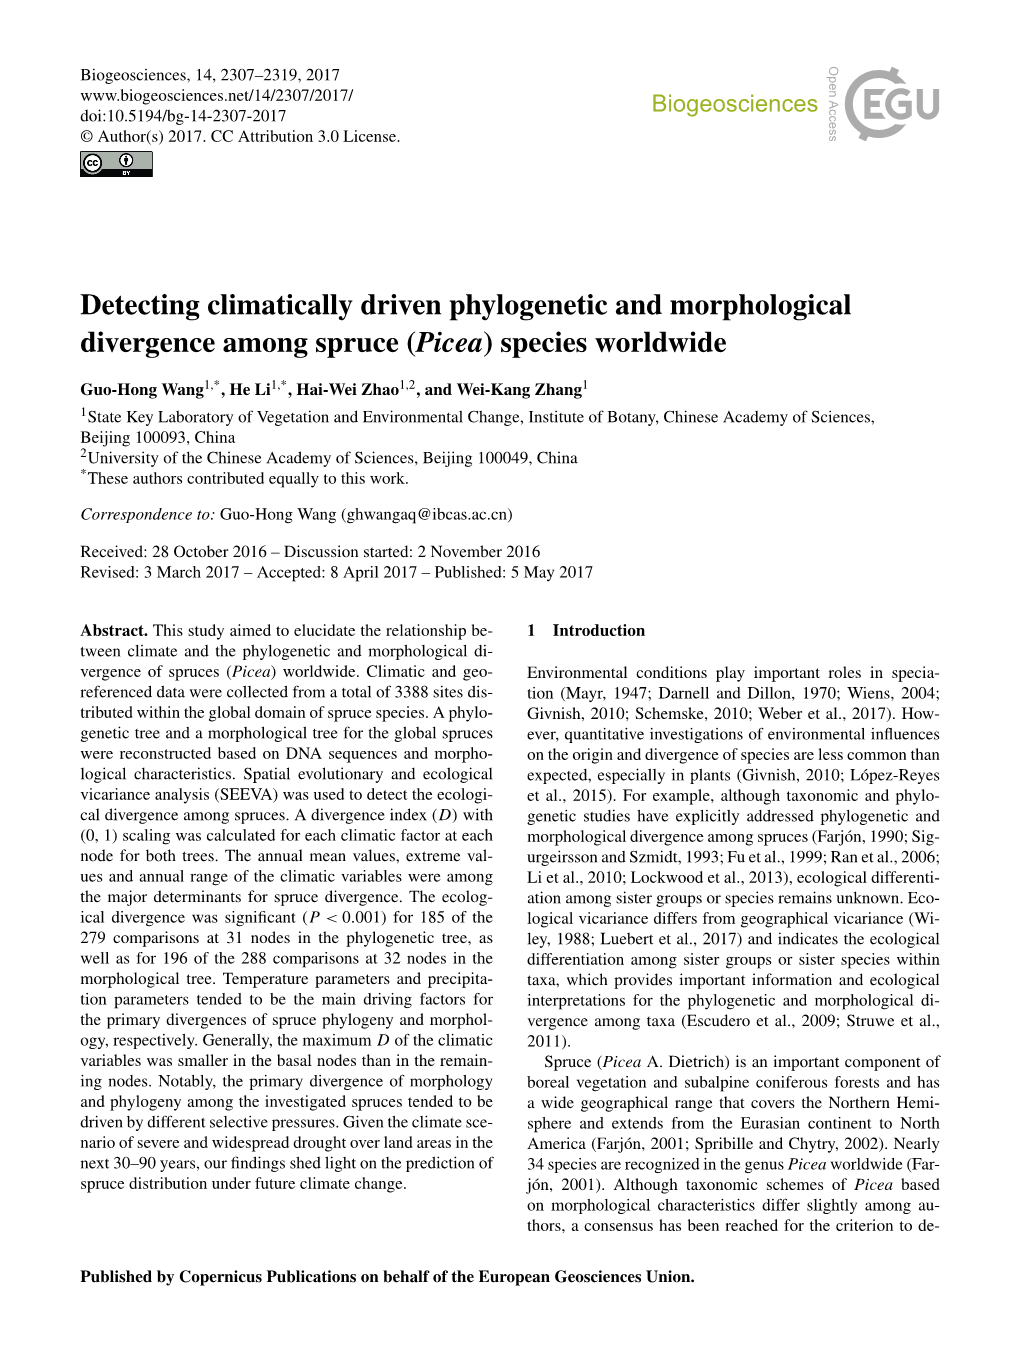 Detecting Climatically Driven Phylogenetic and Morphological Divergence Among Spruce (Picea) Species Worldwide